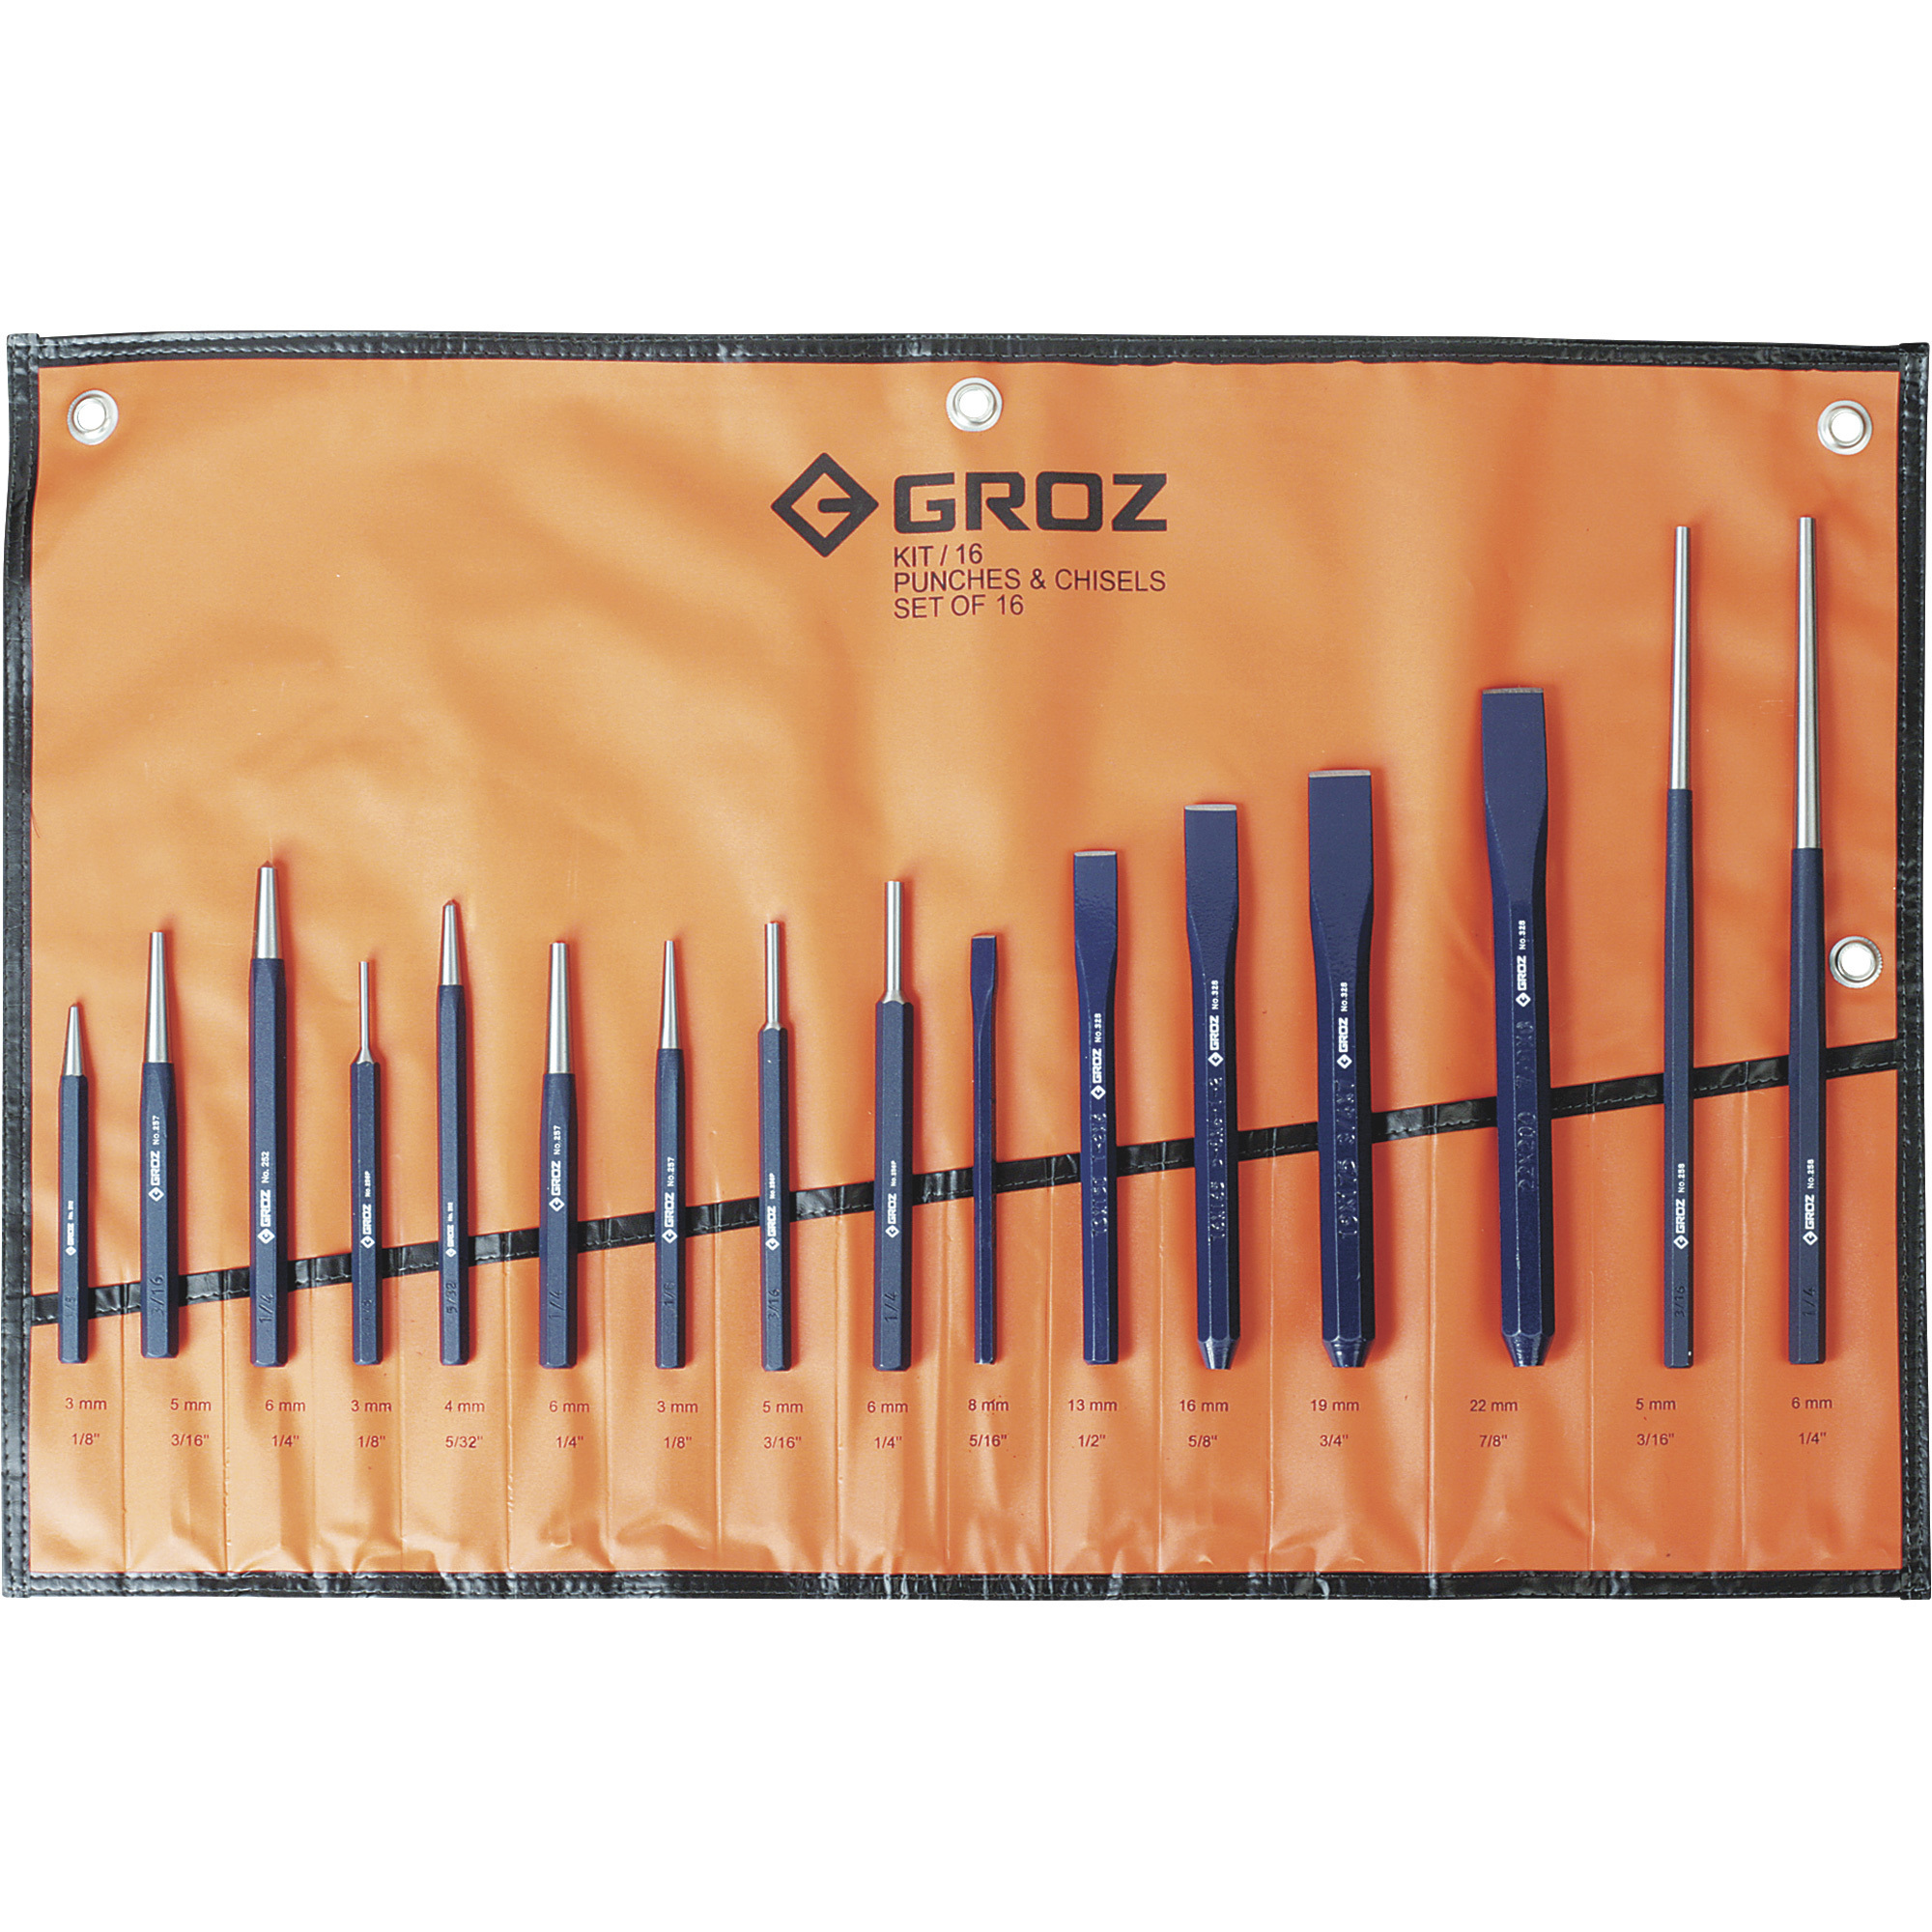 Groz 16-Piece Punch and Chisel Set